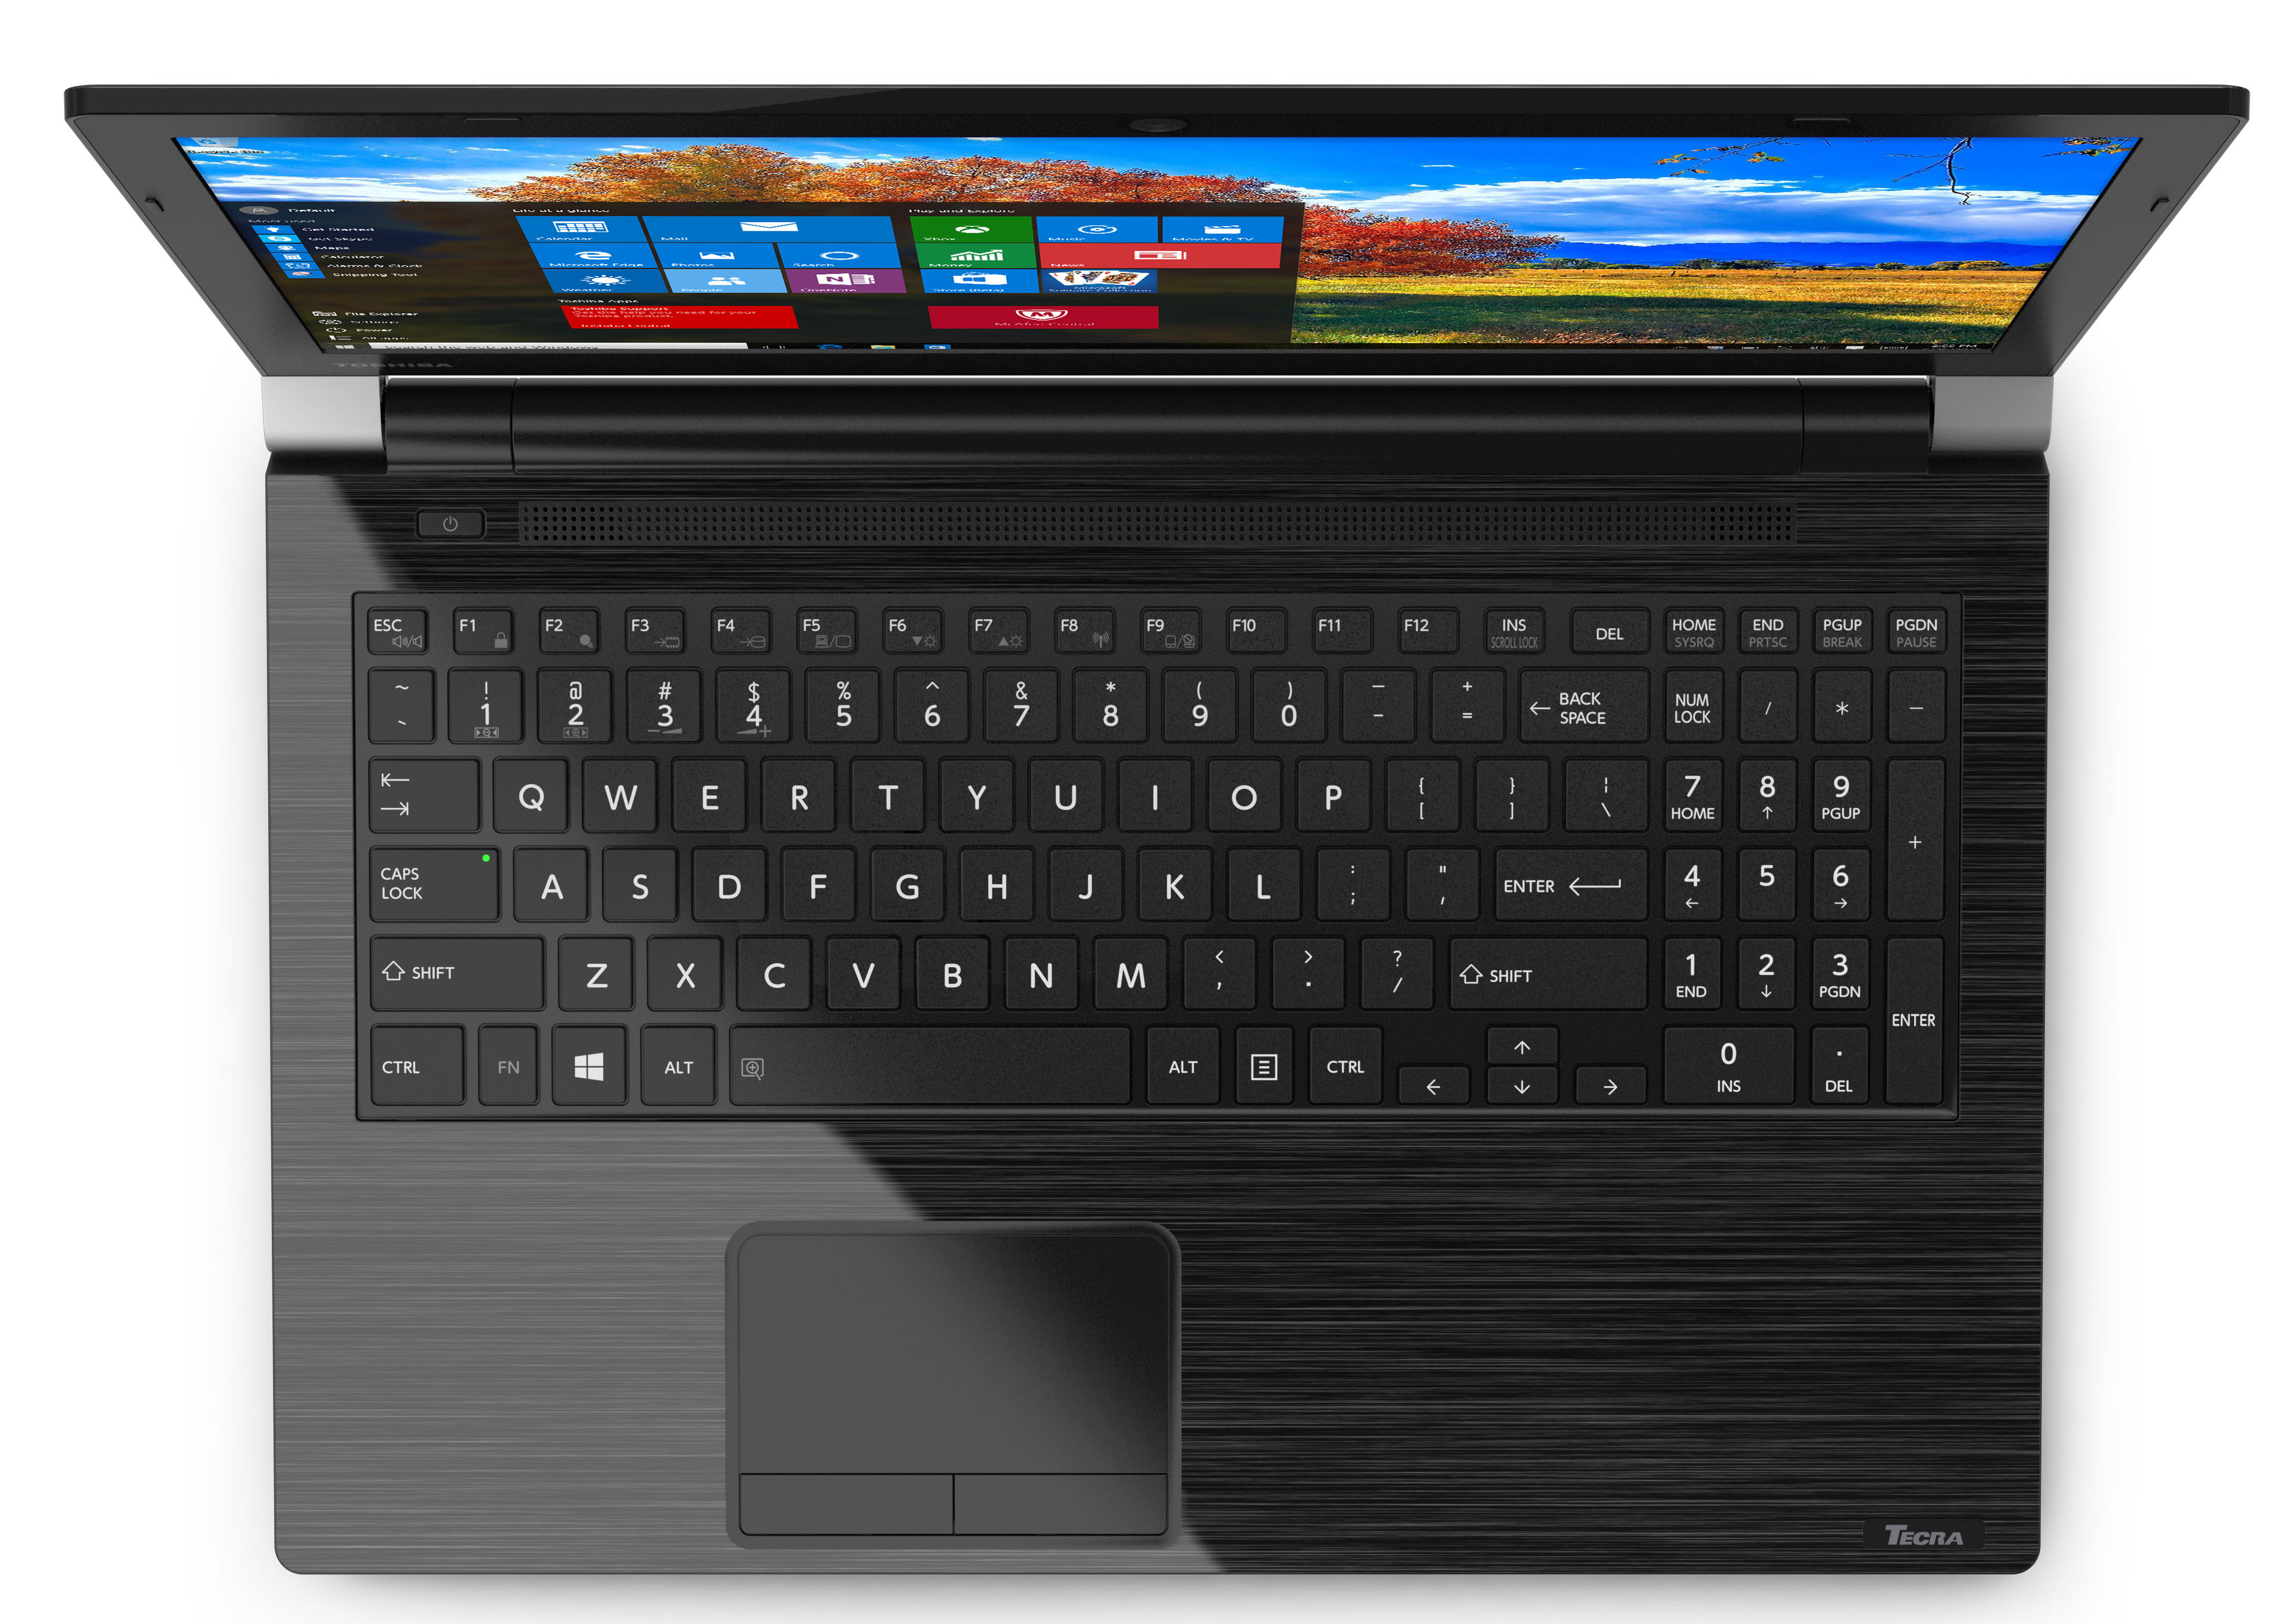 Toshiba Expands SMB Offering with New Windows 10 Ready Laptop 